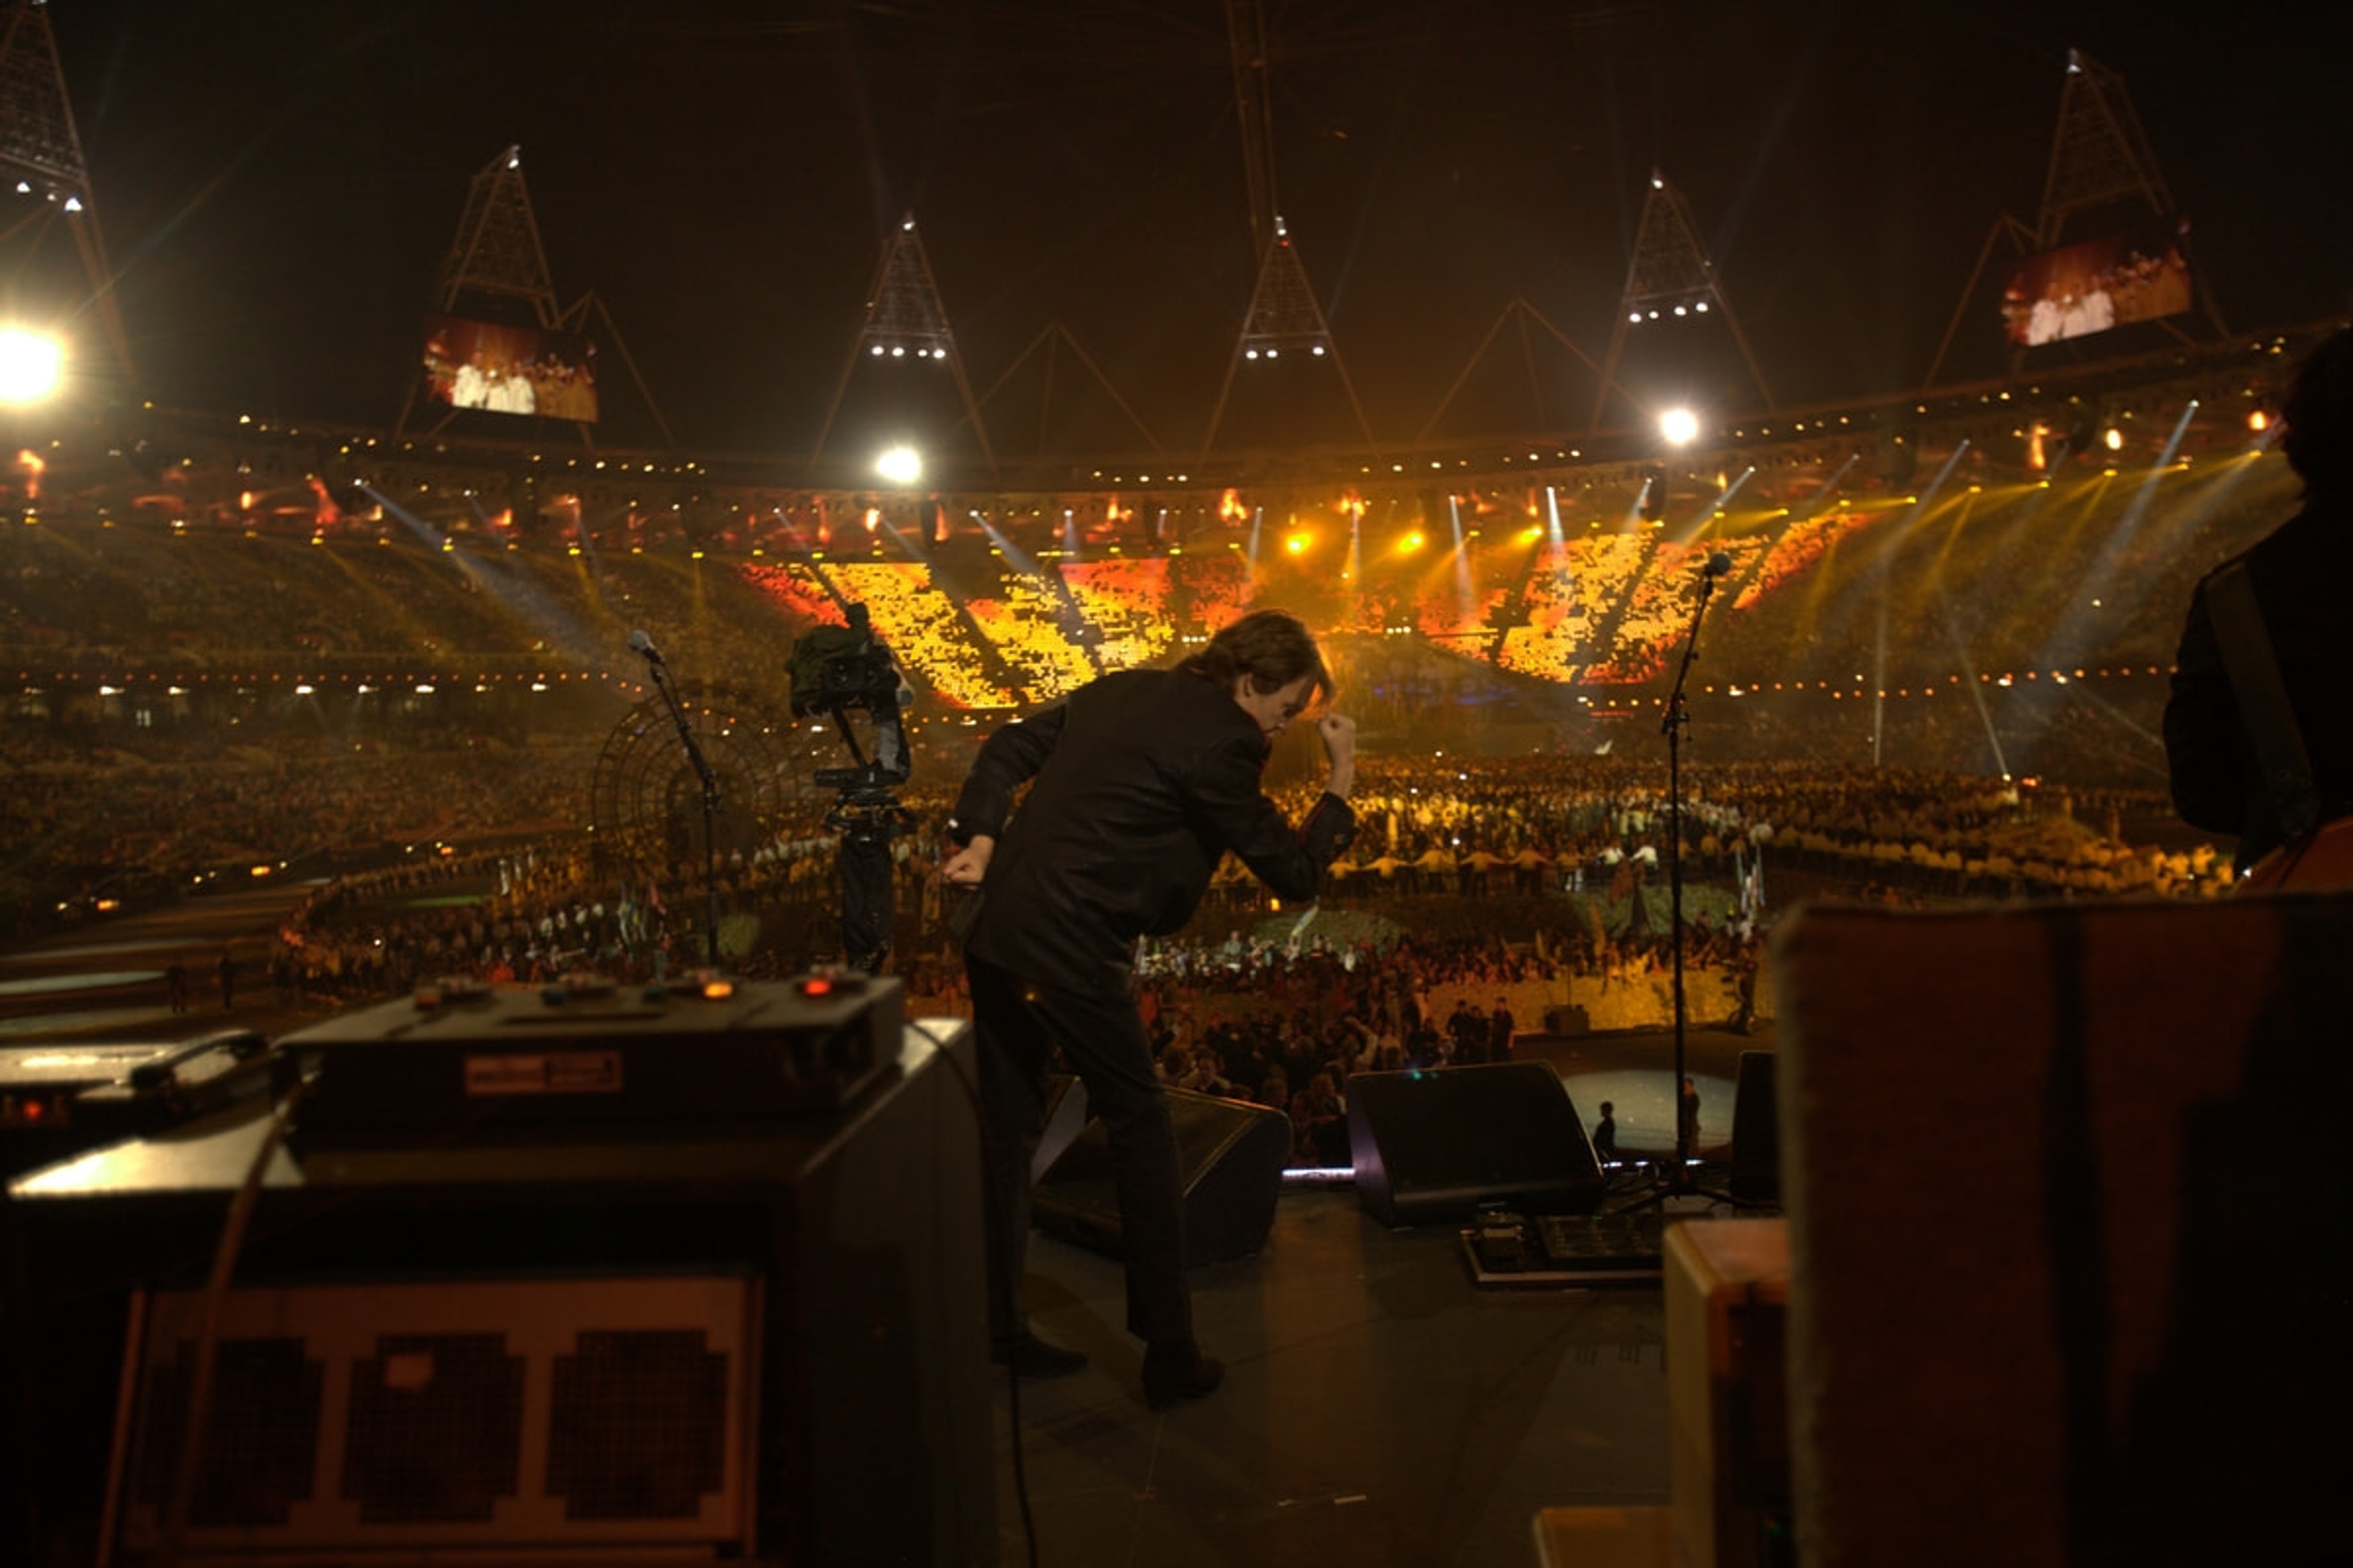 Paul mimicking Usain Bolt's lightning pose on stage at the Olympic Opening Ceremony rehearsals, London, 24-Jul-12